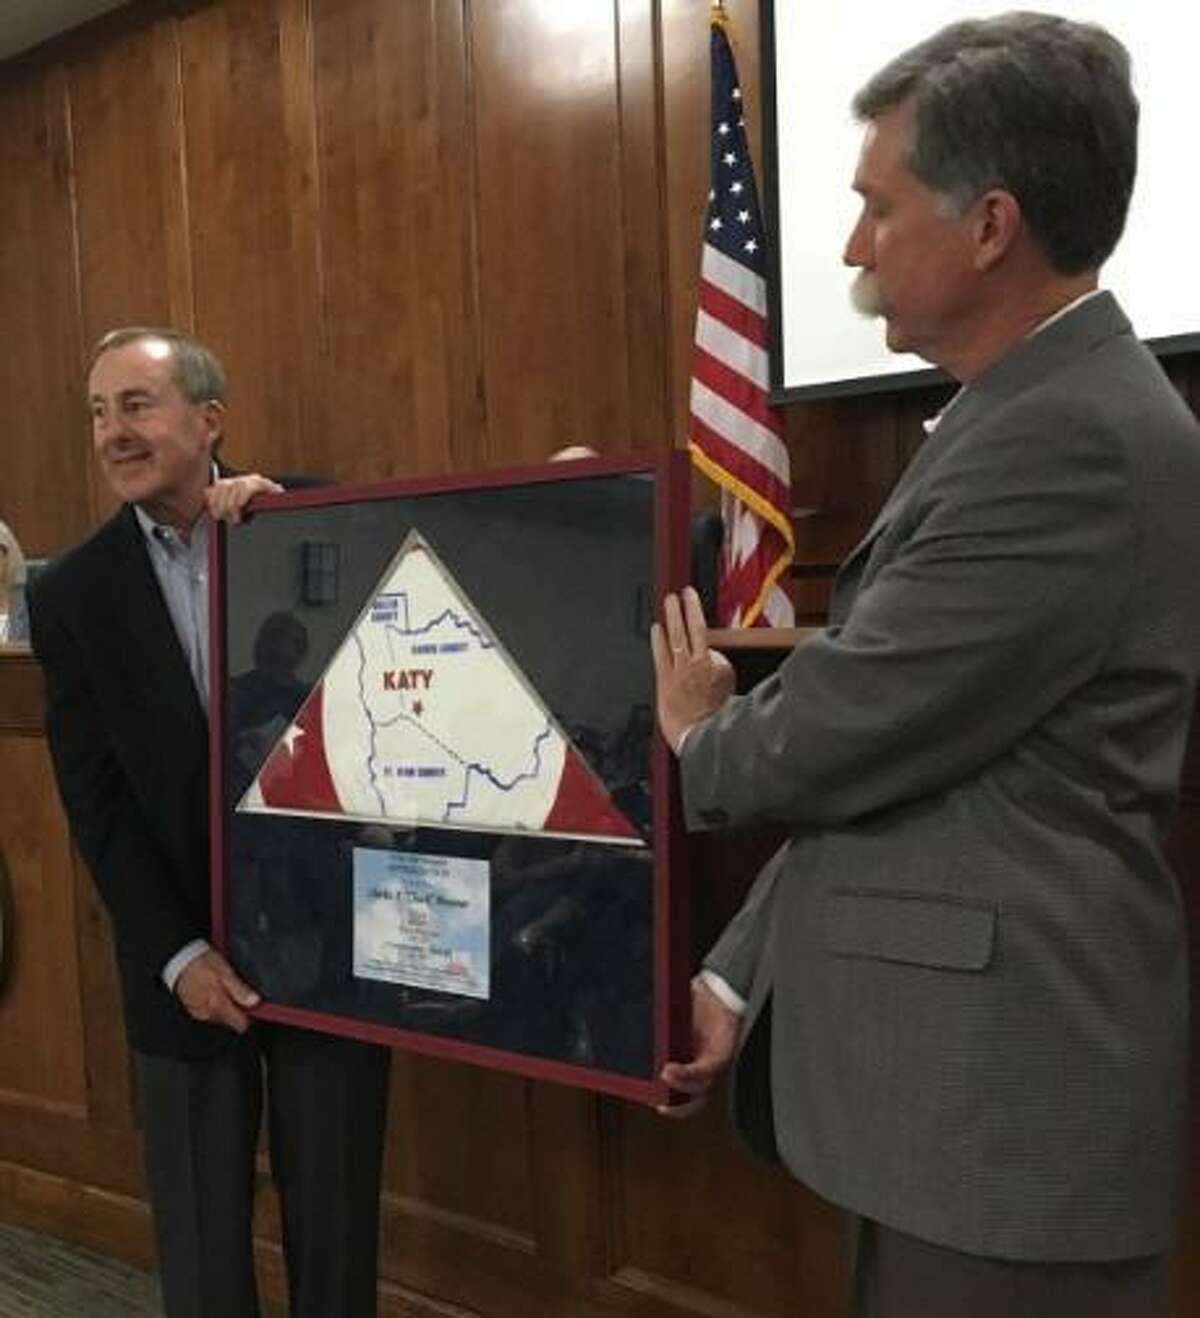 Katy Mayor Pro Tem Durran Dowdle presented a plaque in appreciation of former Chuck Brawner’s service as mayor since 2017. Before becoming mayor, Brawner had served in City Council since 2013.